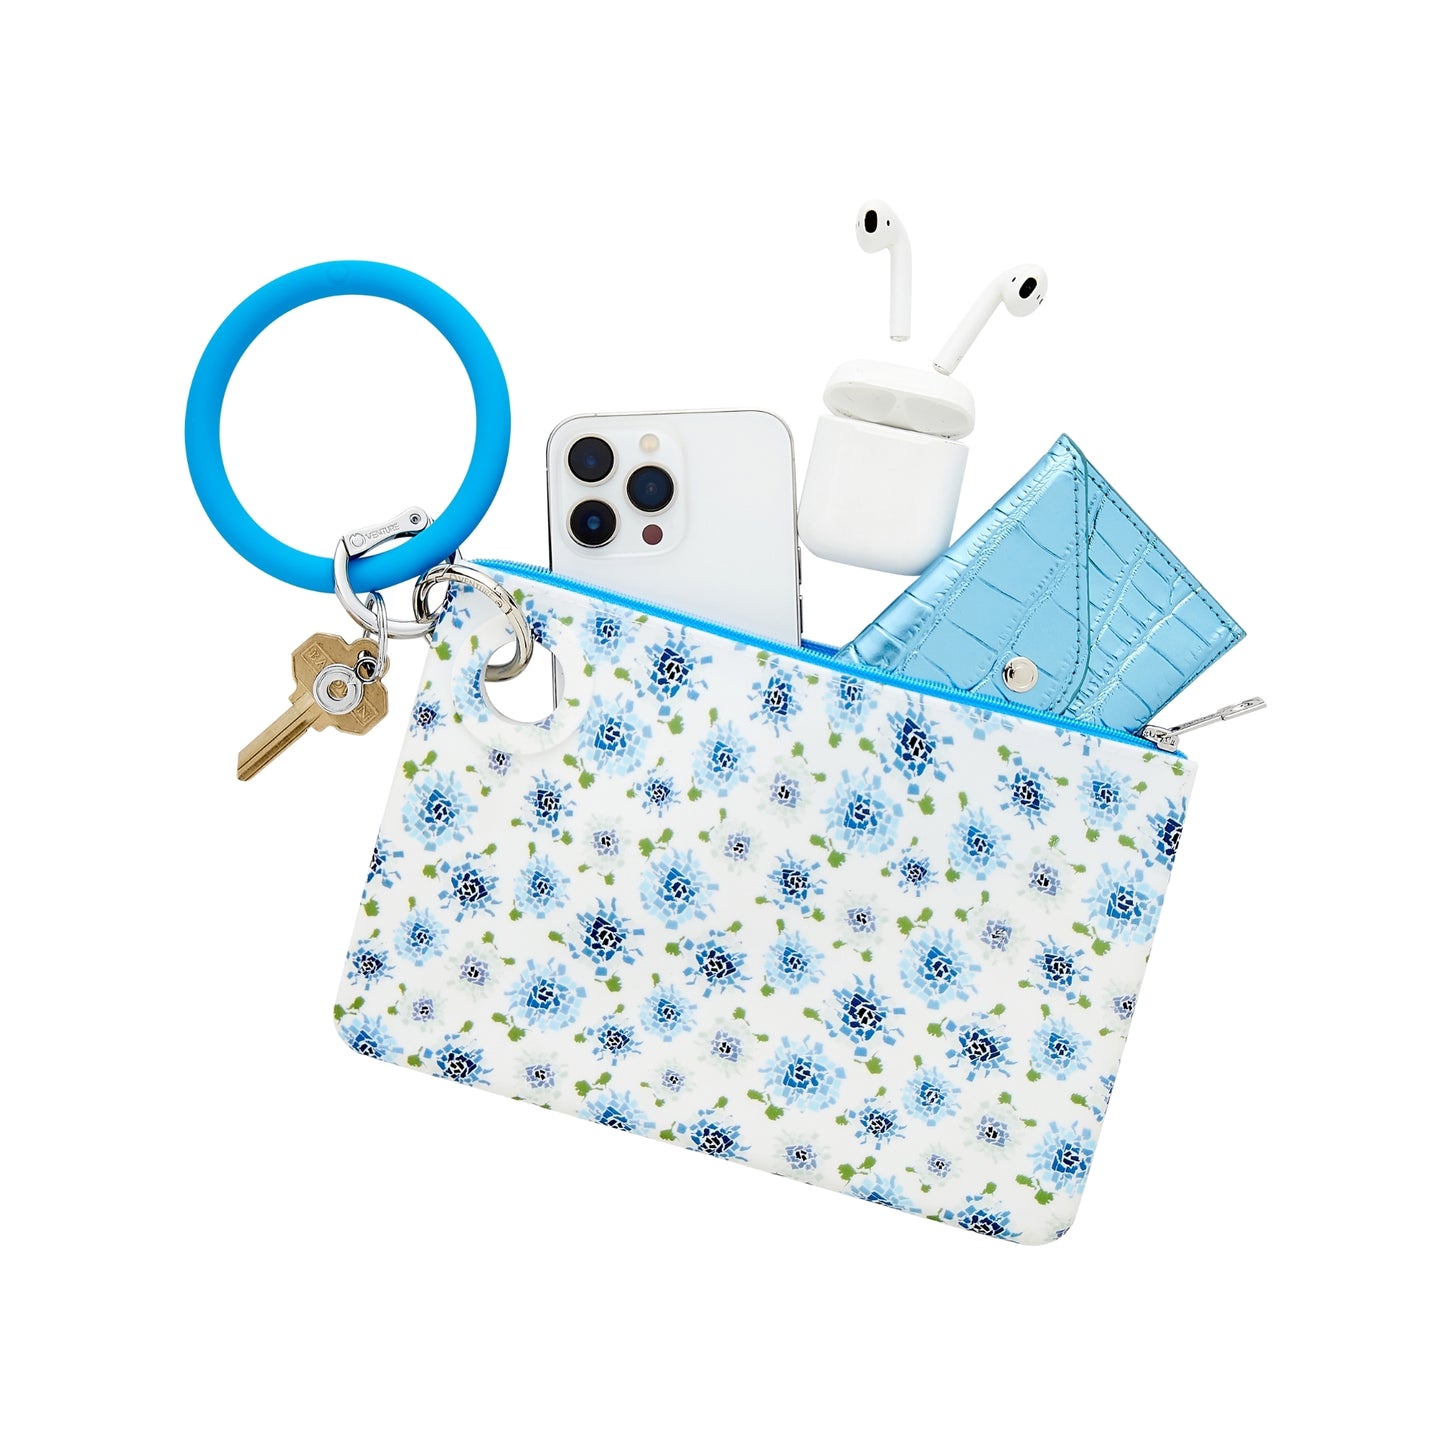 The large silicone pouch has a unique print of hydrangeas. The hydrangeas are made up of the fifty states shapes in an array of blue colors. It is attached to the peacock silicone Big O Key Ring